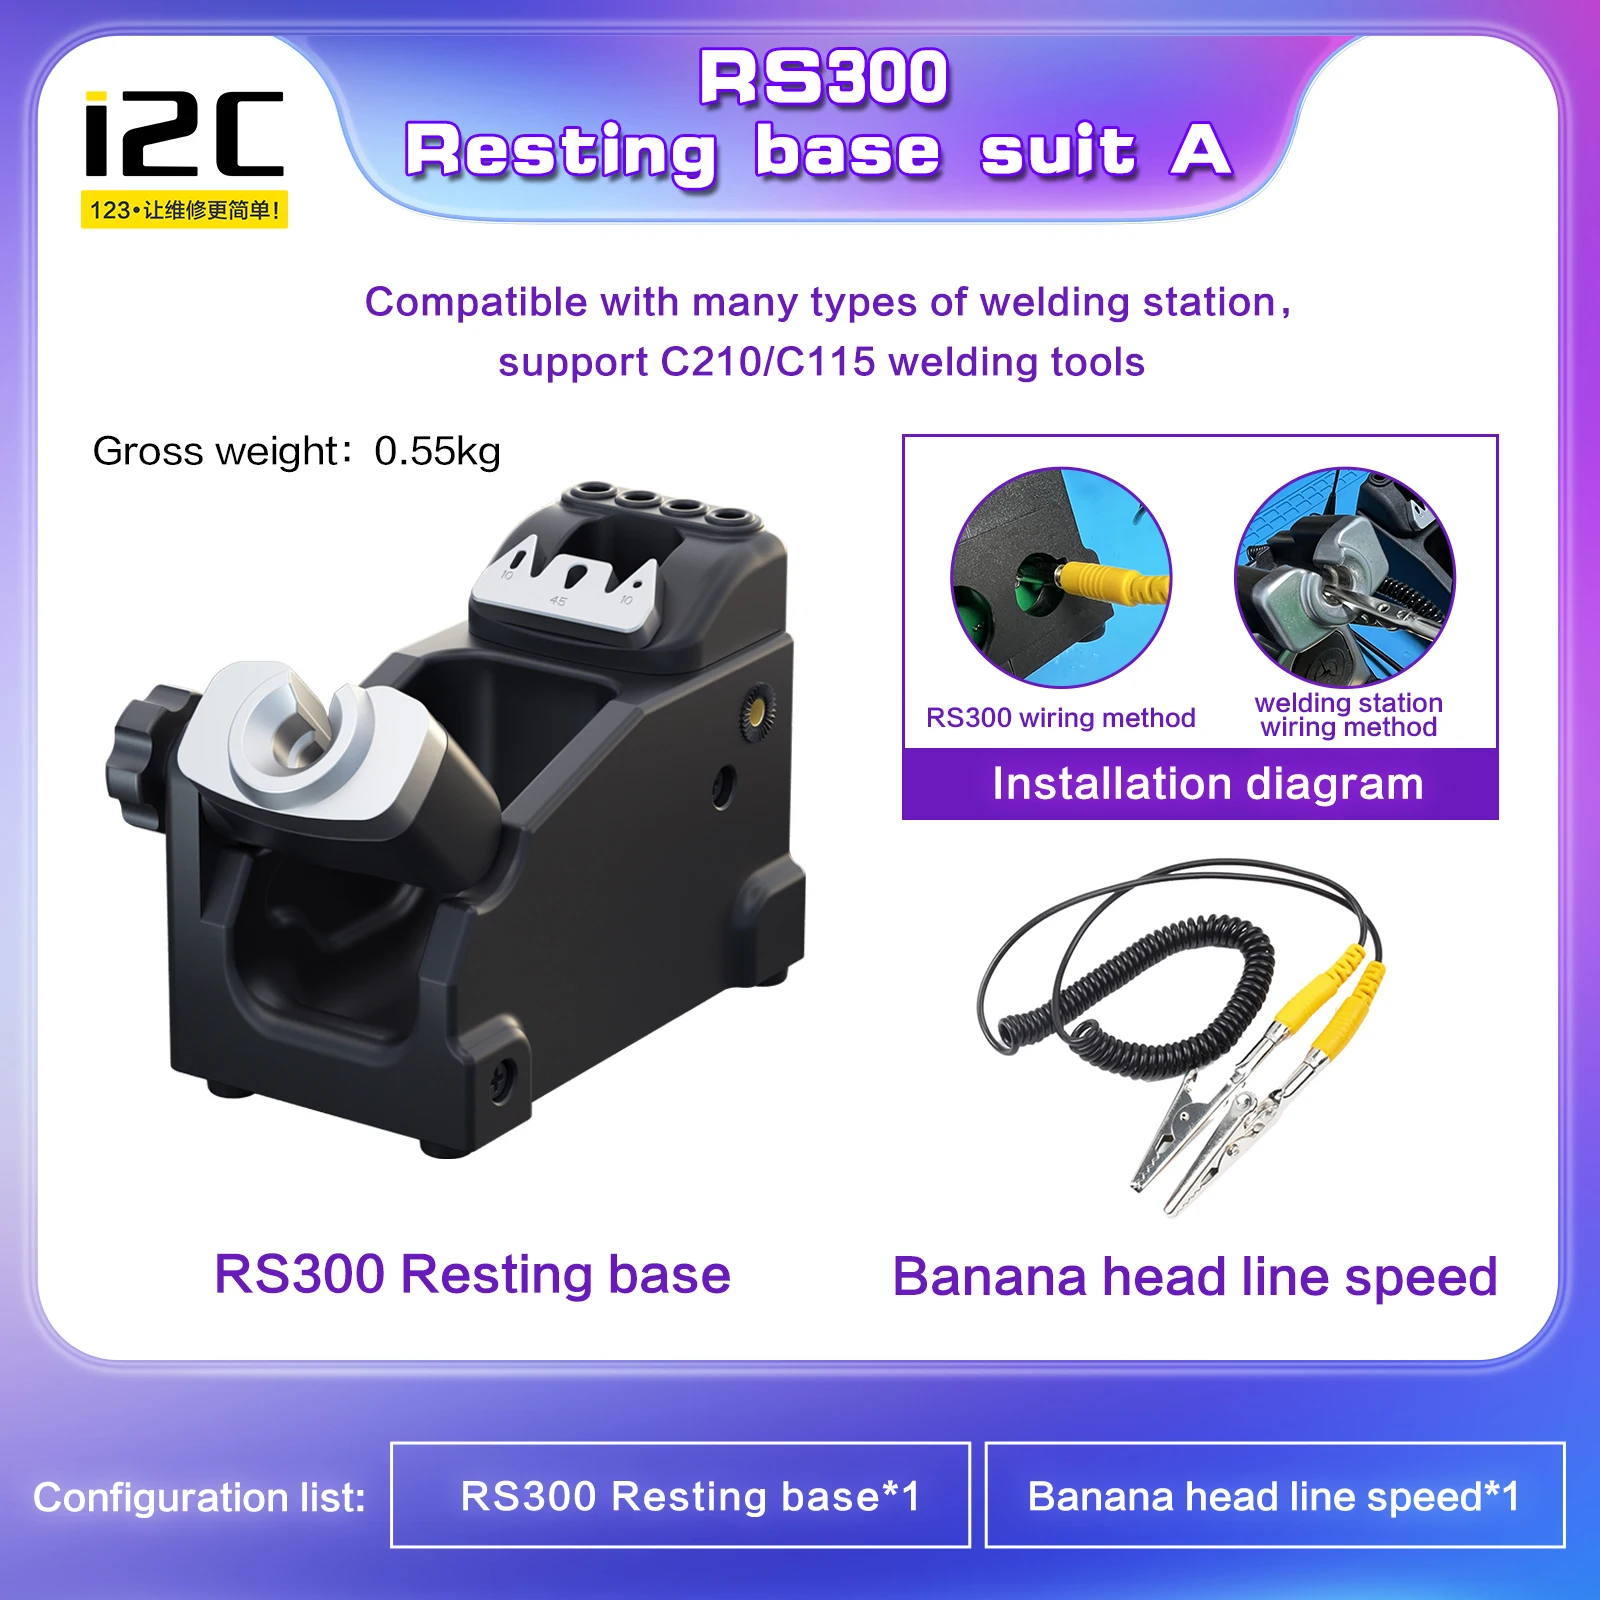 i2c-rs300-stand-dormant-base-with-banana-cable-soldering-station-compatible-with-210-245-115-welding-iron-handle